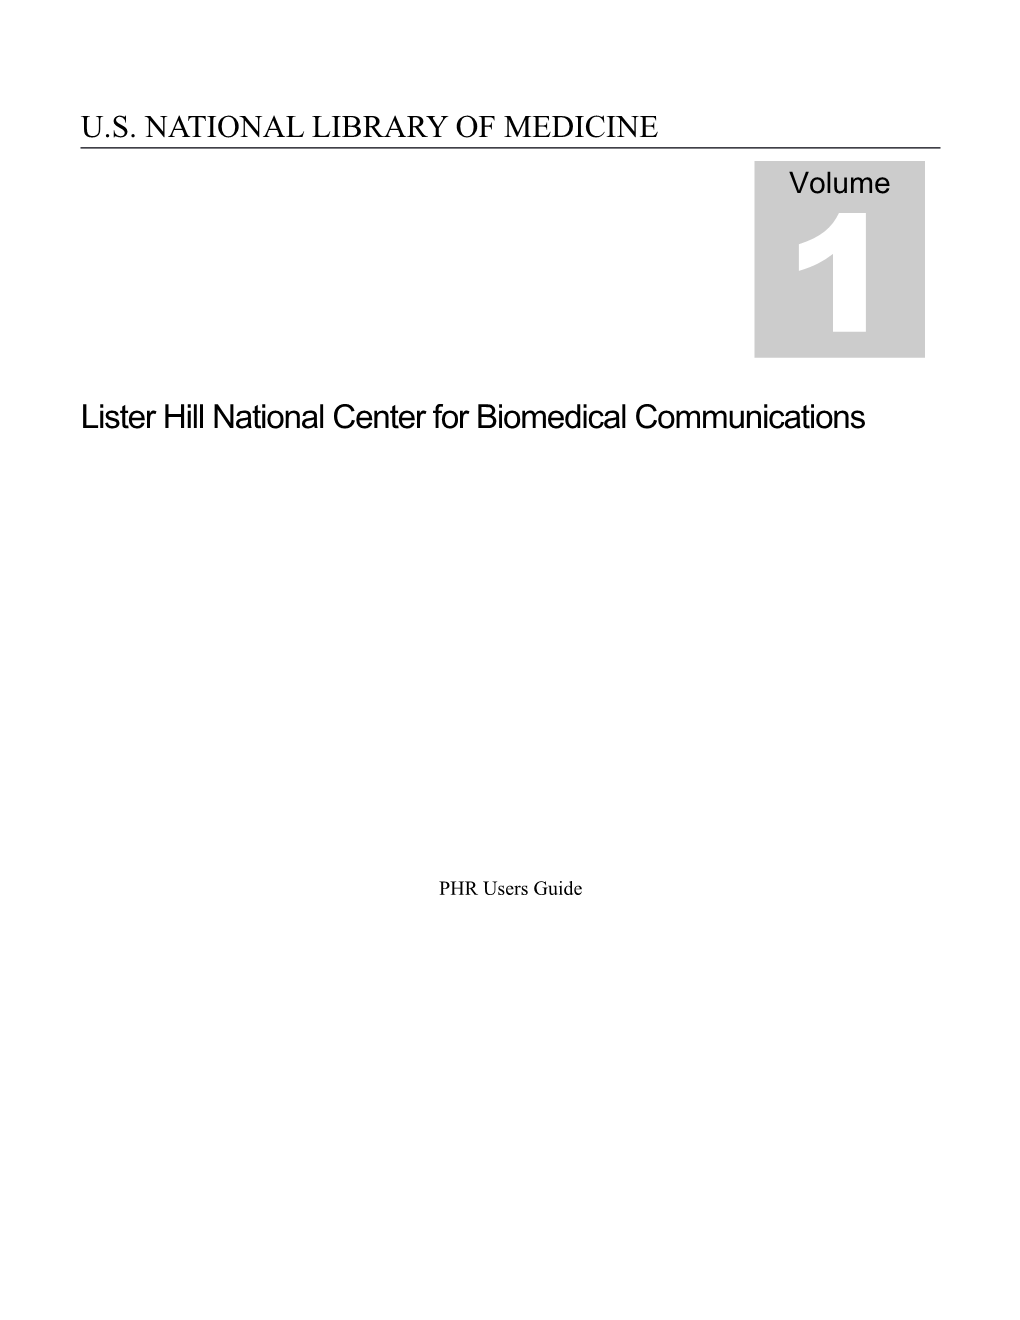 Lister Hill National Center for Biomedical Communications